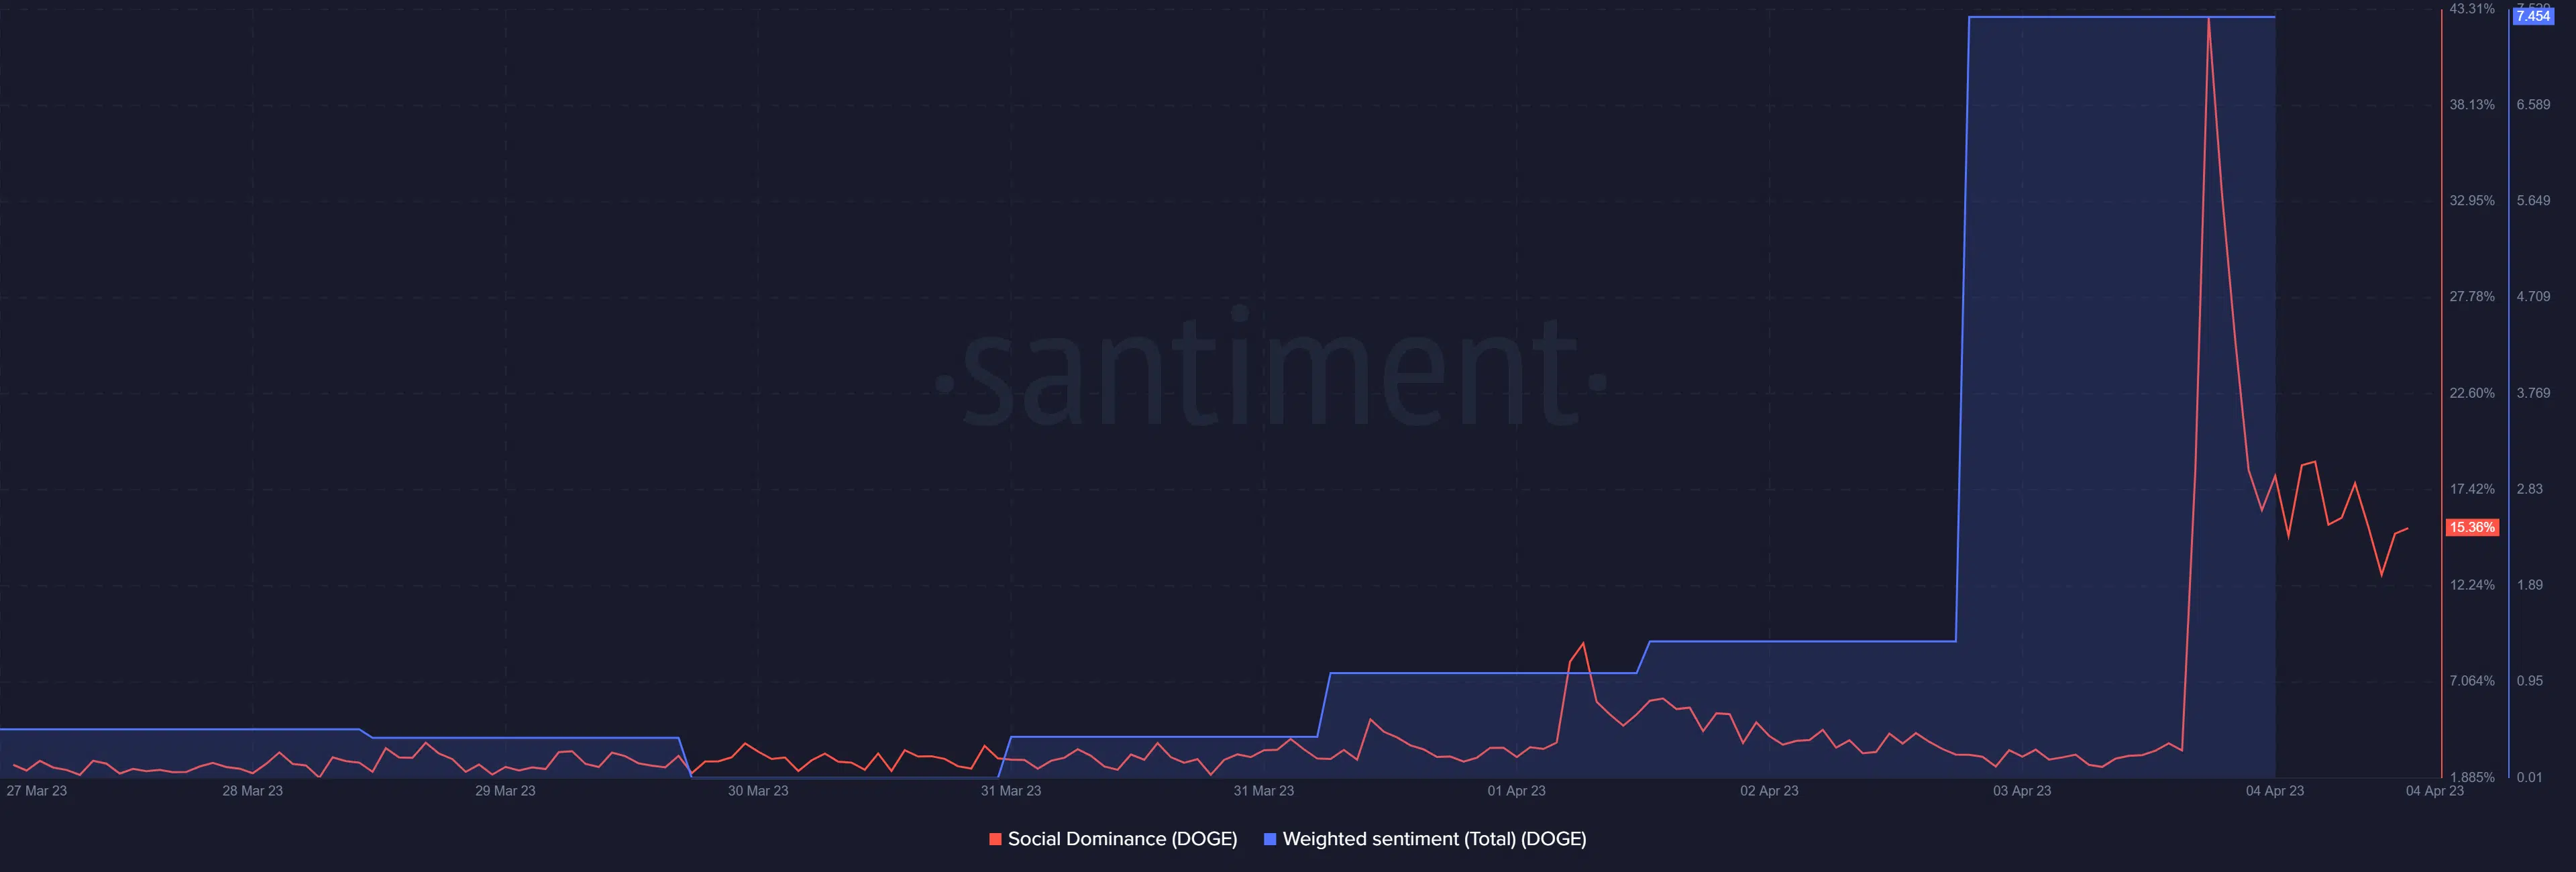 Dogecoin social dominance and weighted sentiment